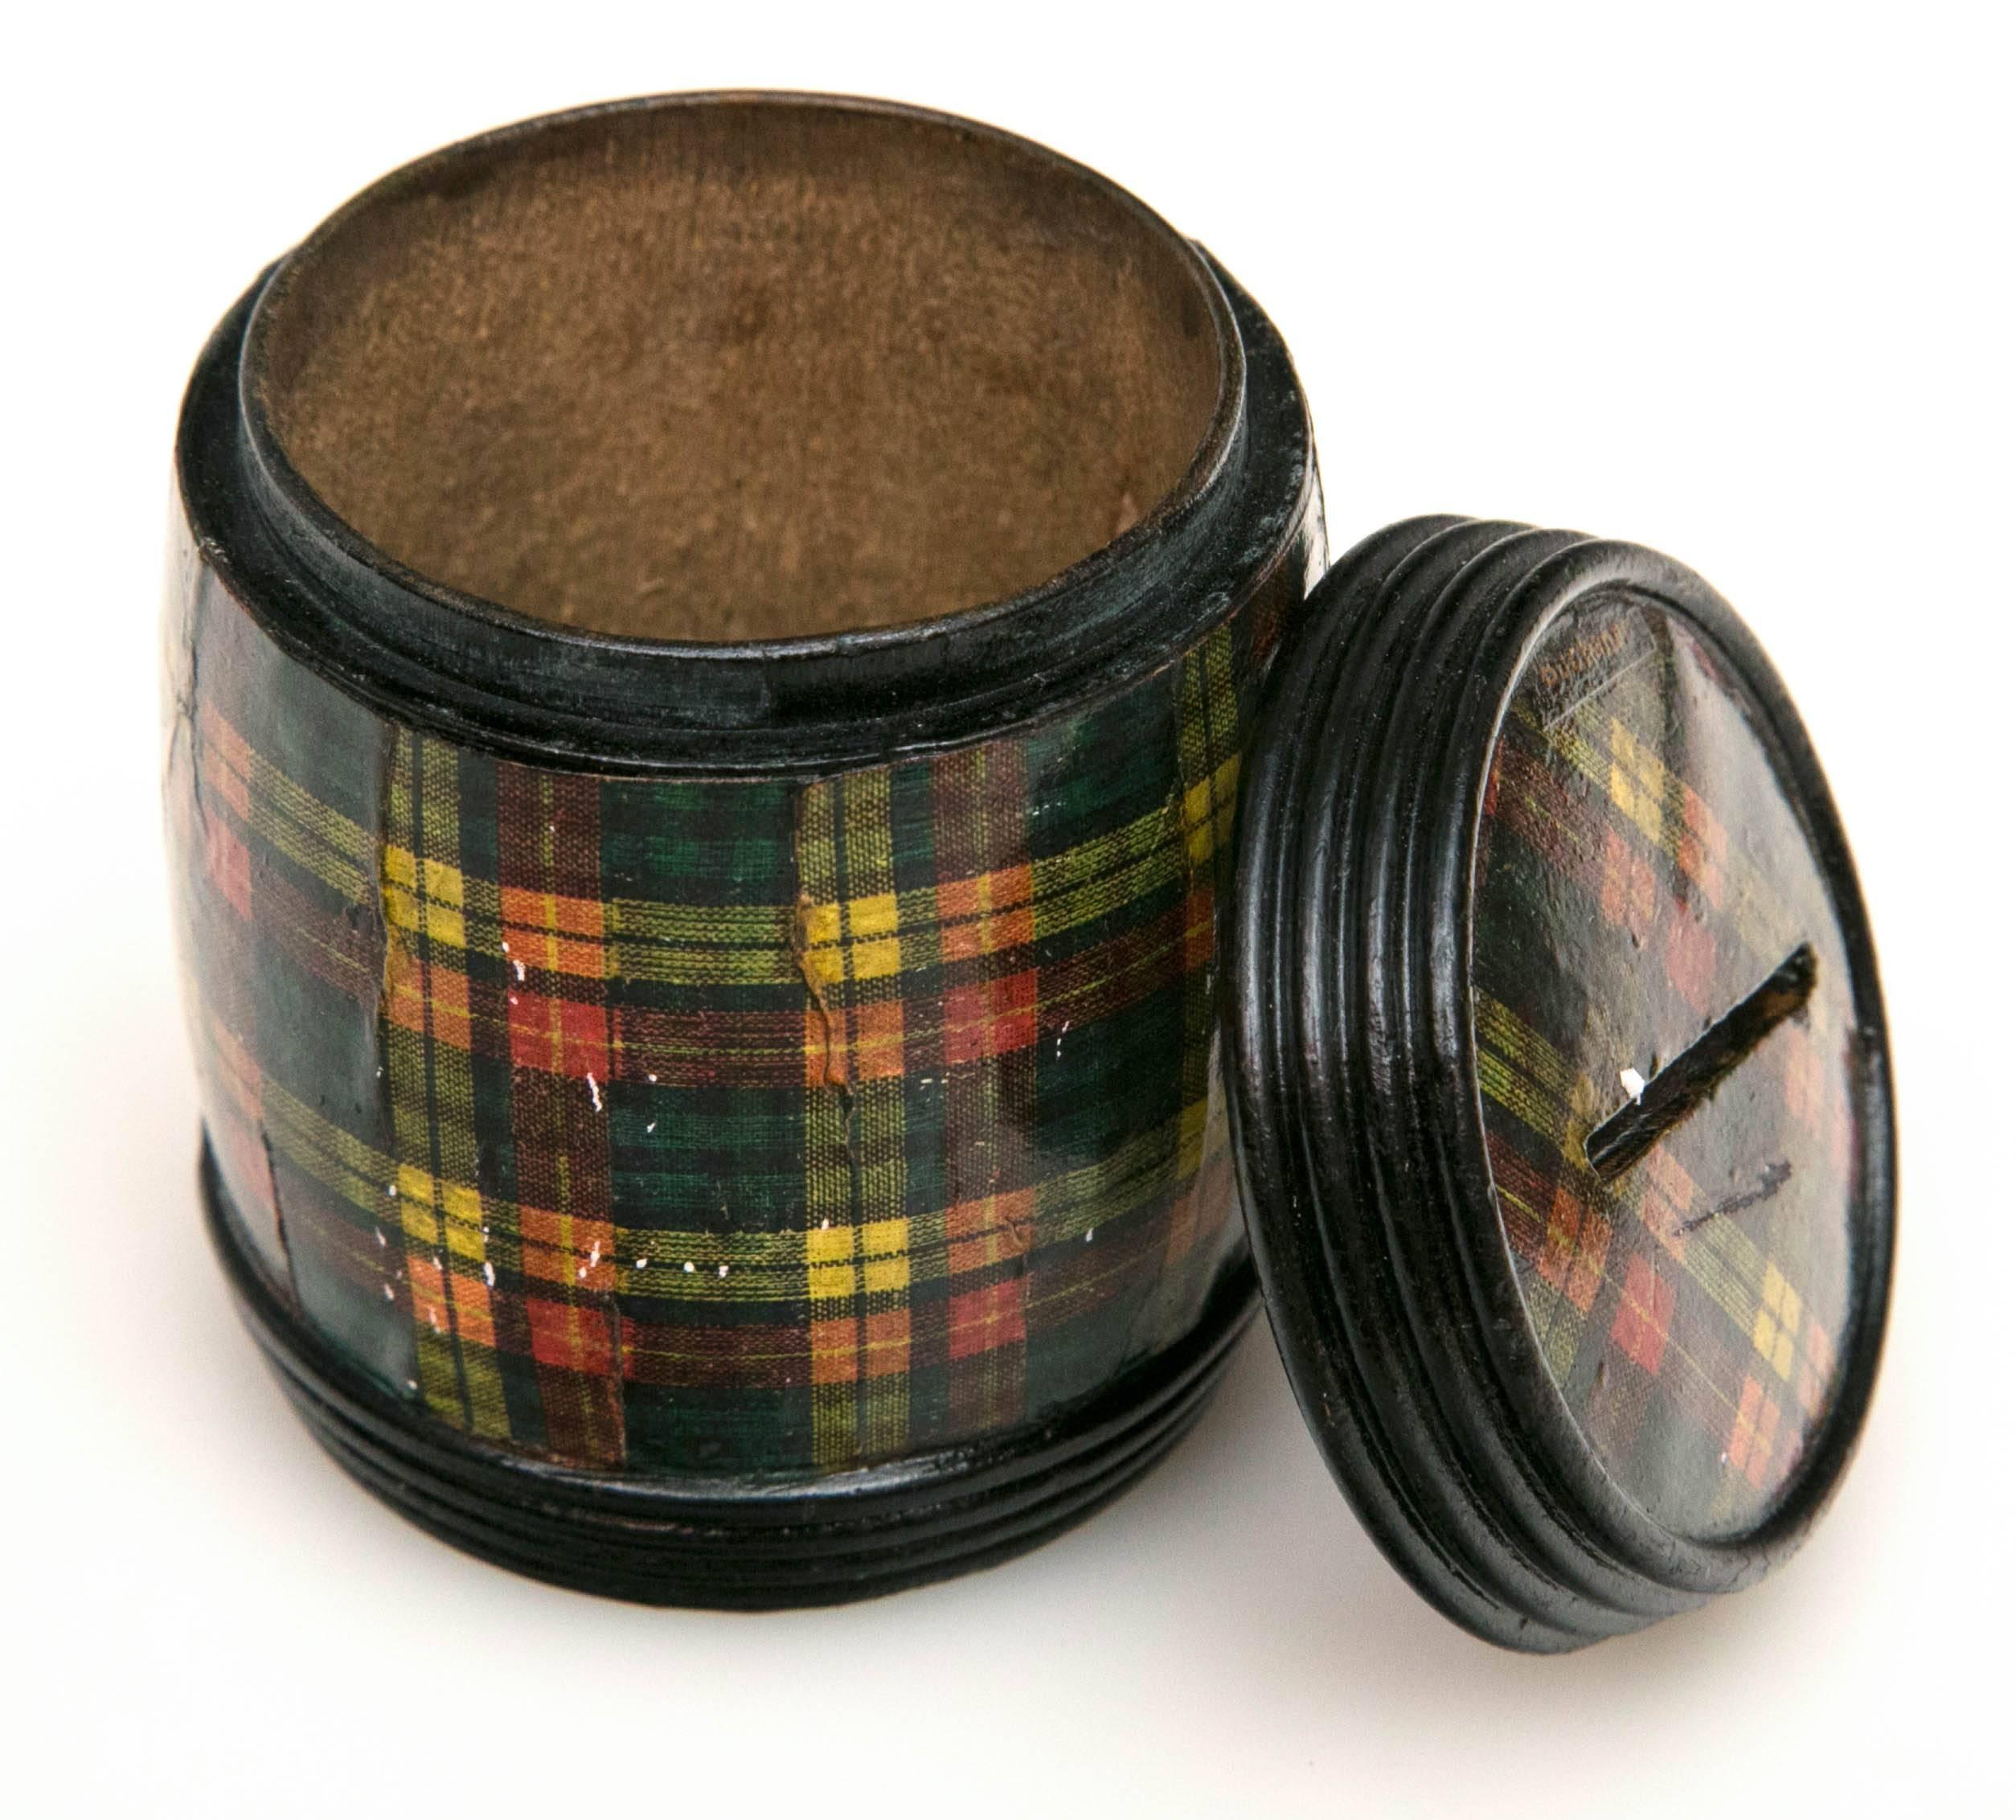 In the mid-1800s tartan became the most popular decoration for souvenirs of Scotland and the box makers of Mauchline soon invented machines to rule the multi-colored clan tartans with many traditional plaid patterns. Soon, new machines were able to